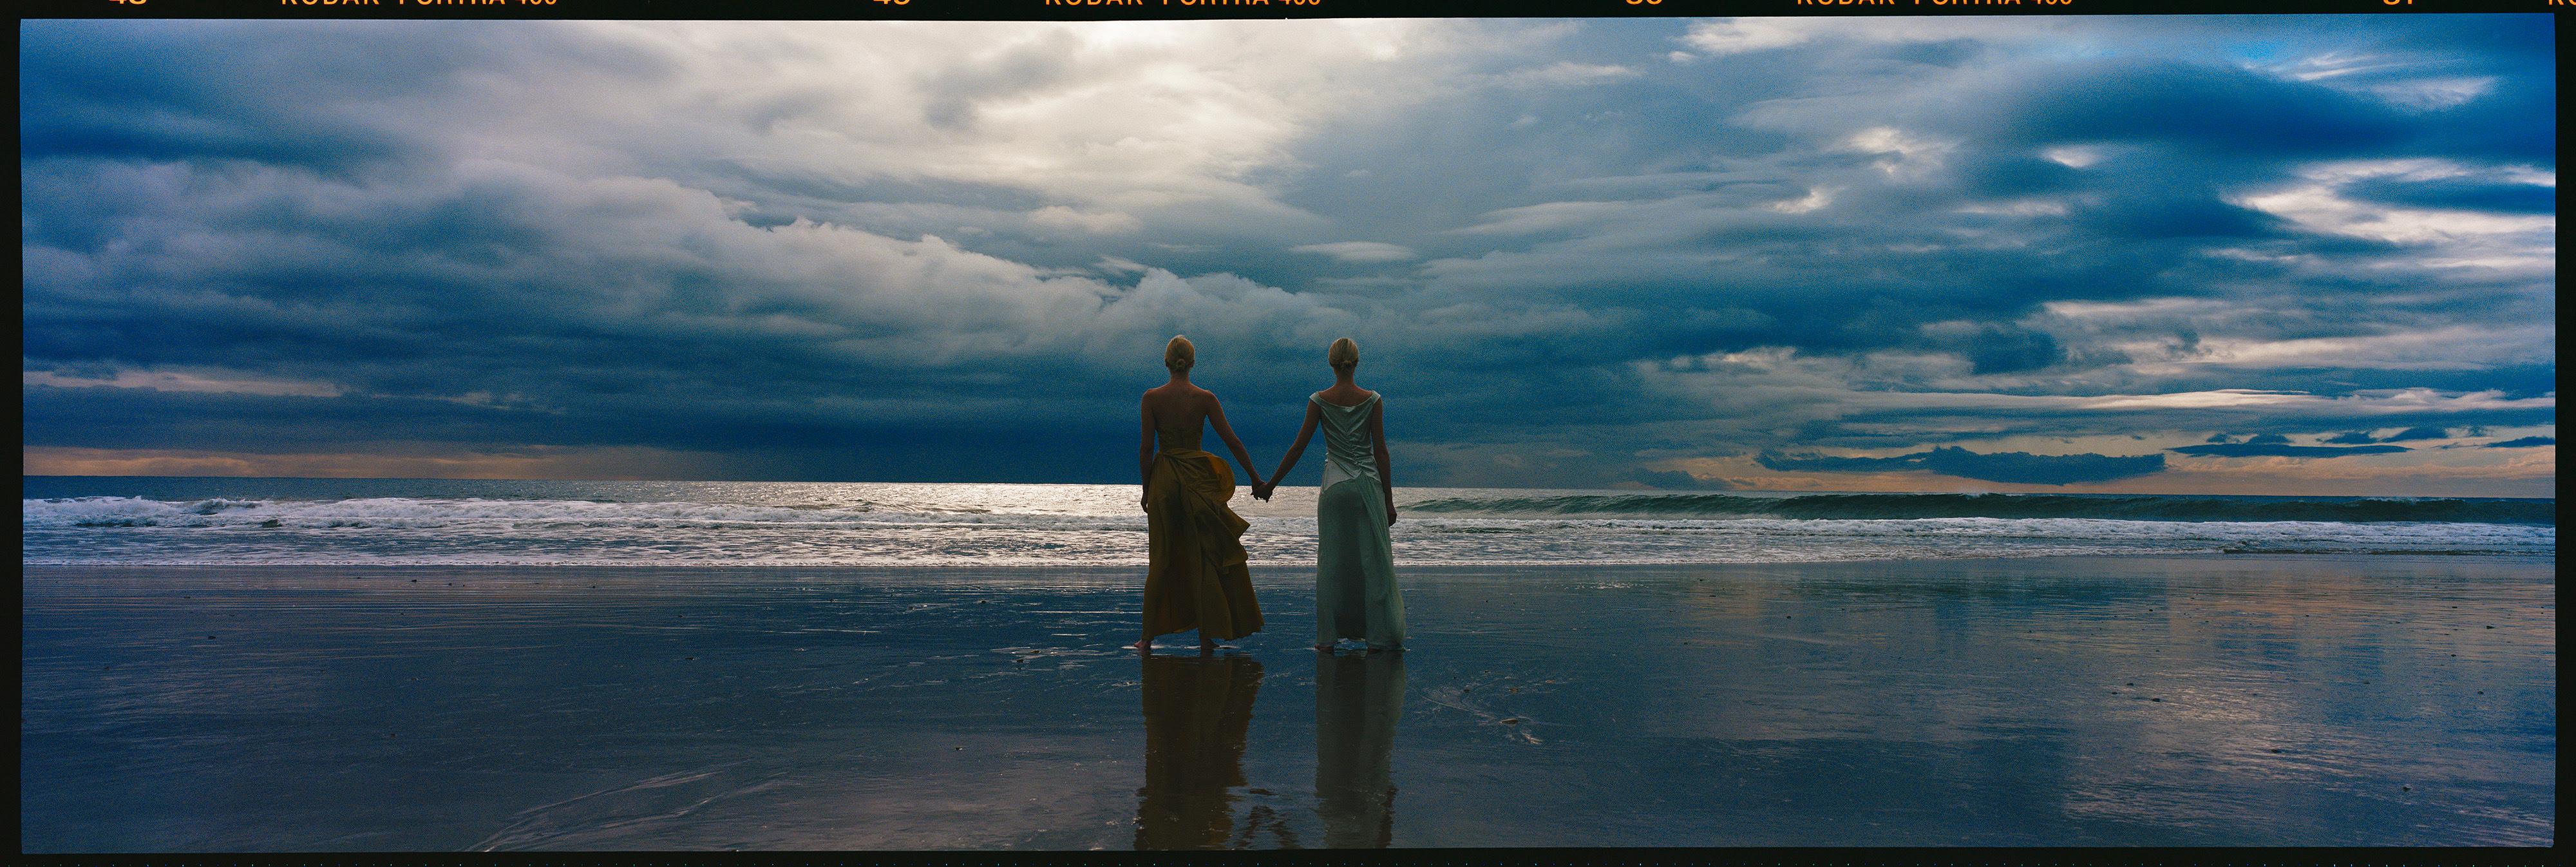 Tyler Shields Color Photograph - At The Oceans Edge (30" x 90")